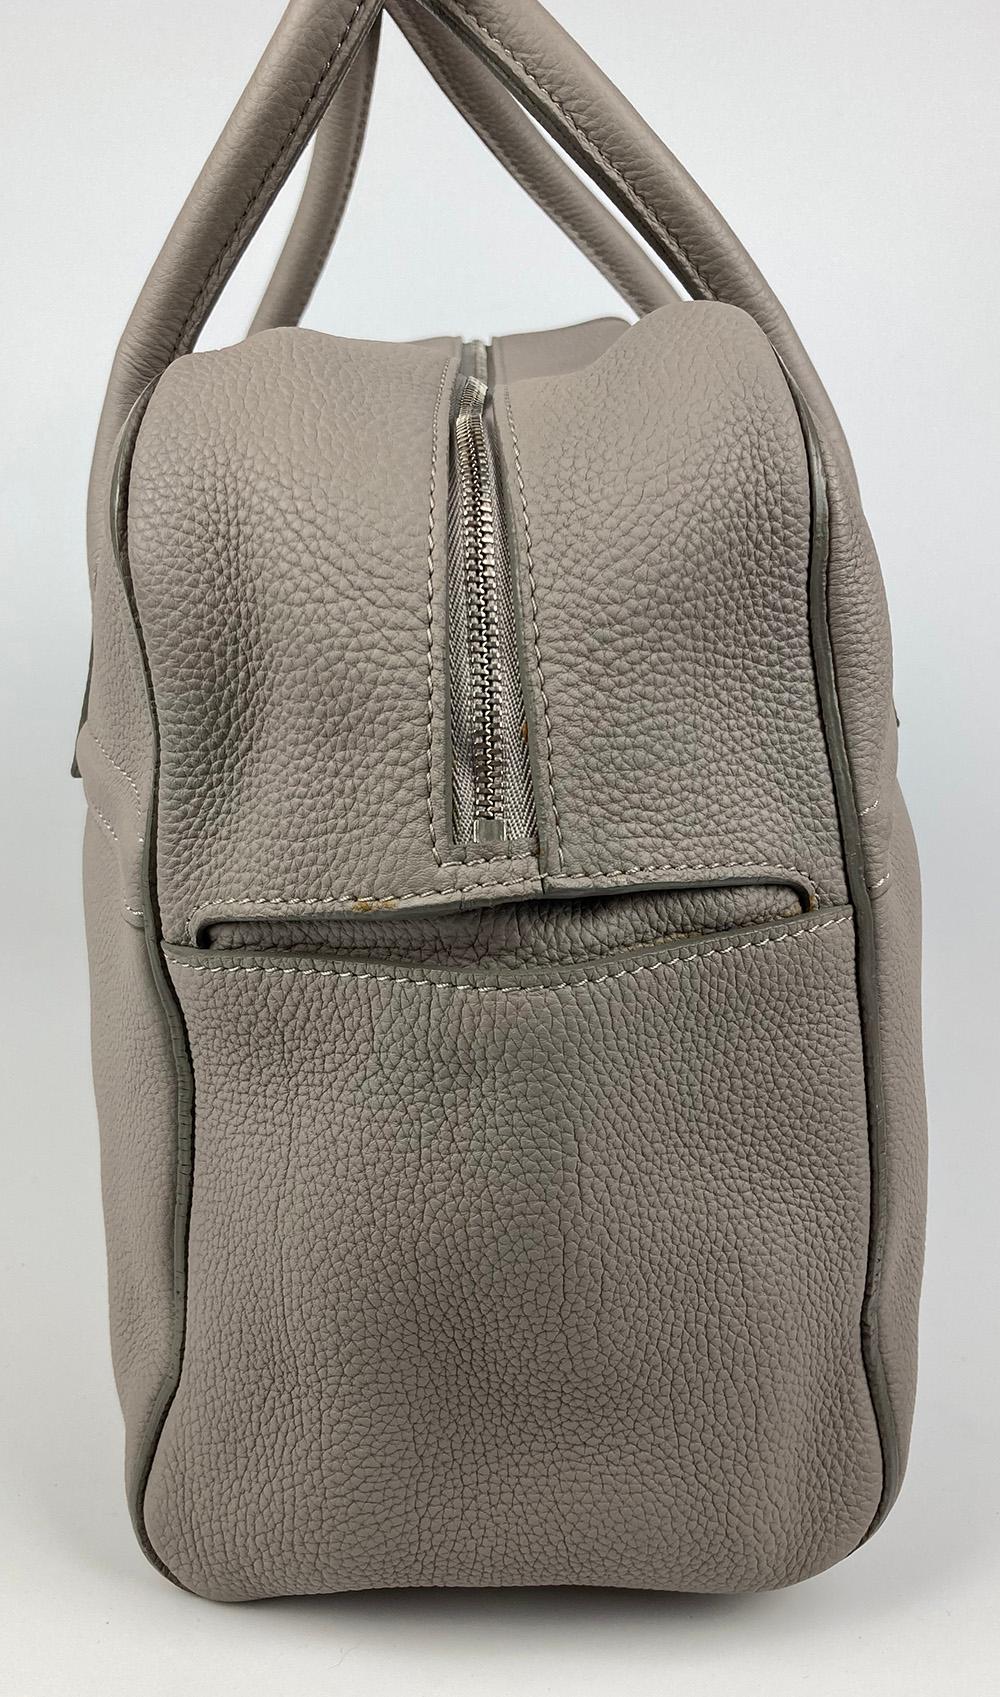 Loro Piana Grey Leather Duffle Tote in excellent condition. Grey leather lambskin exterior trimmed with top double handles, silver hardware and removable shoulder strap. Top zip closure opens to a grey leather interior with 3 slit side pockets, one